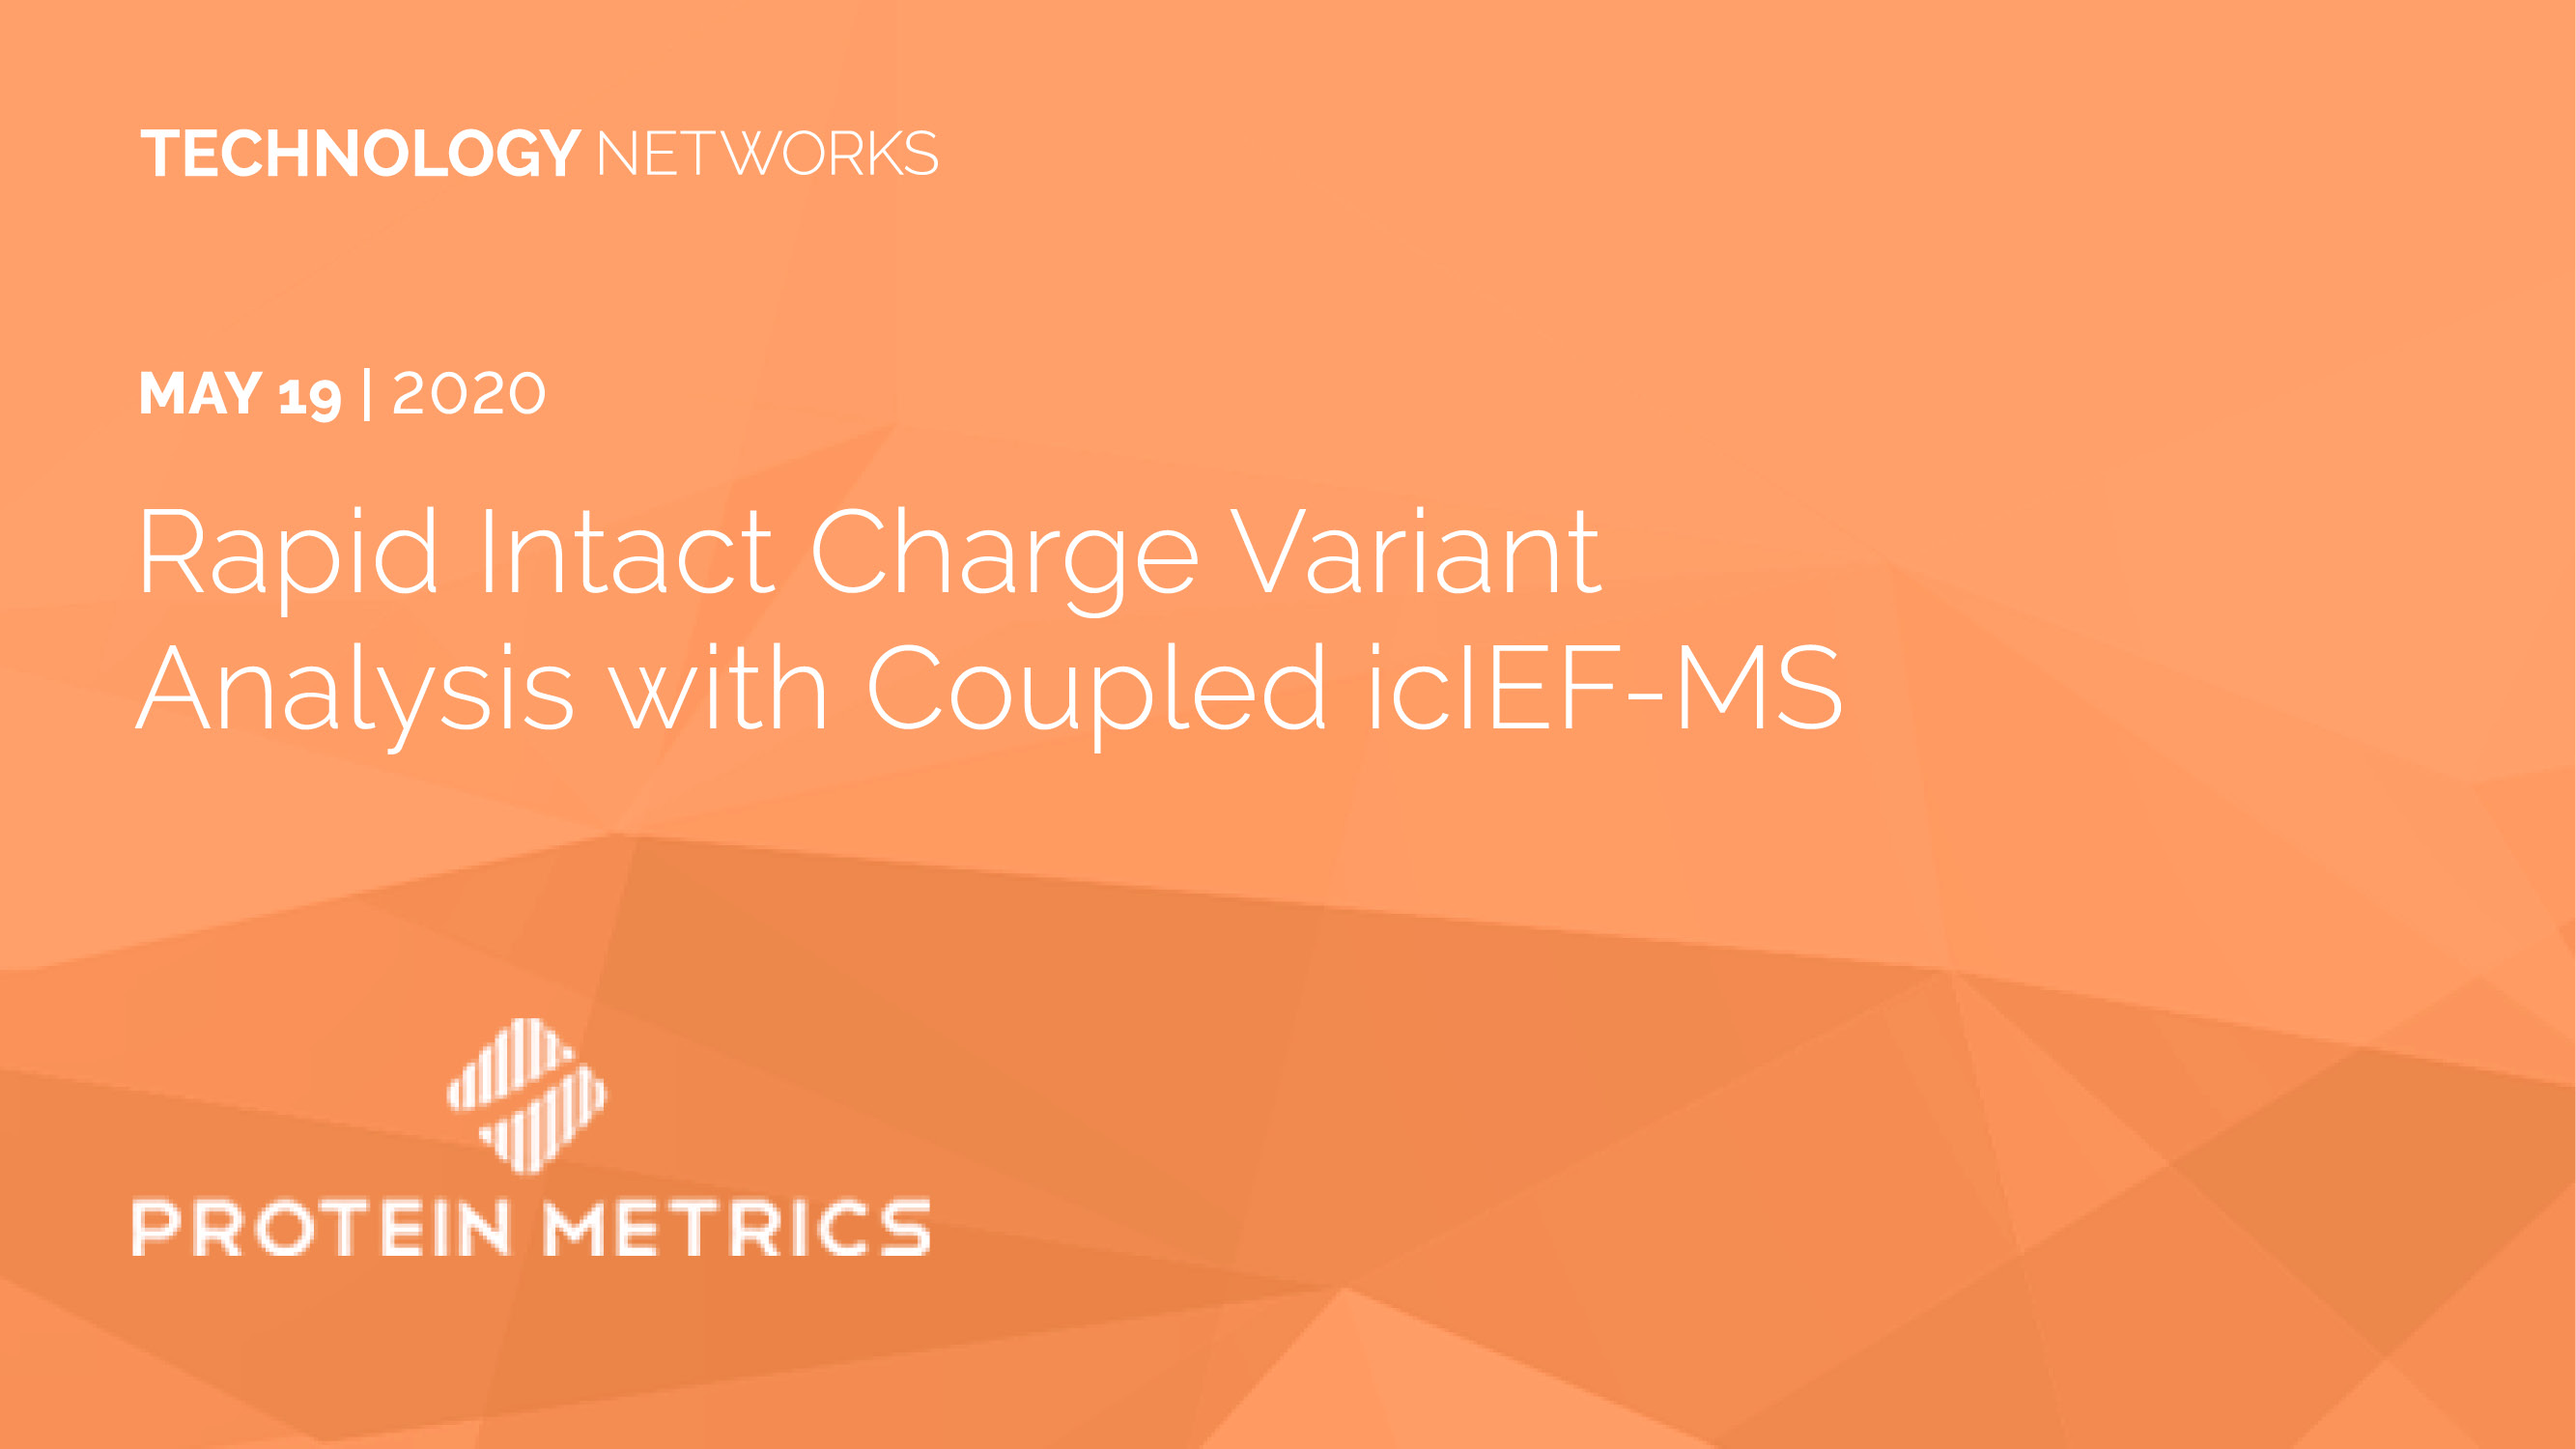 Rapid Intact Charge Variant Analysis with Coupled icIEF-MS